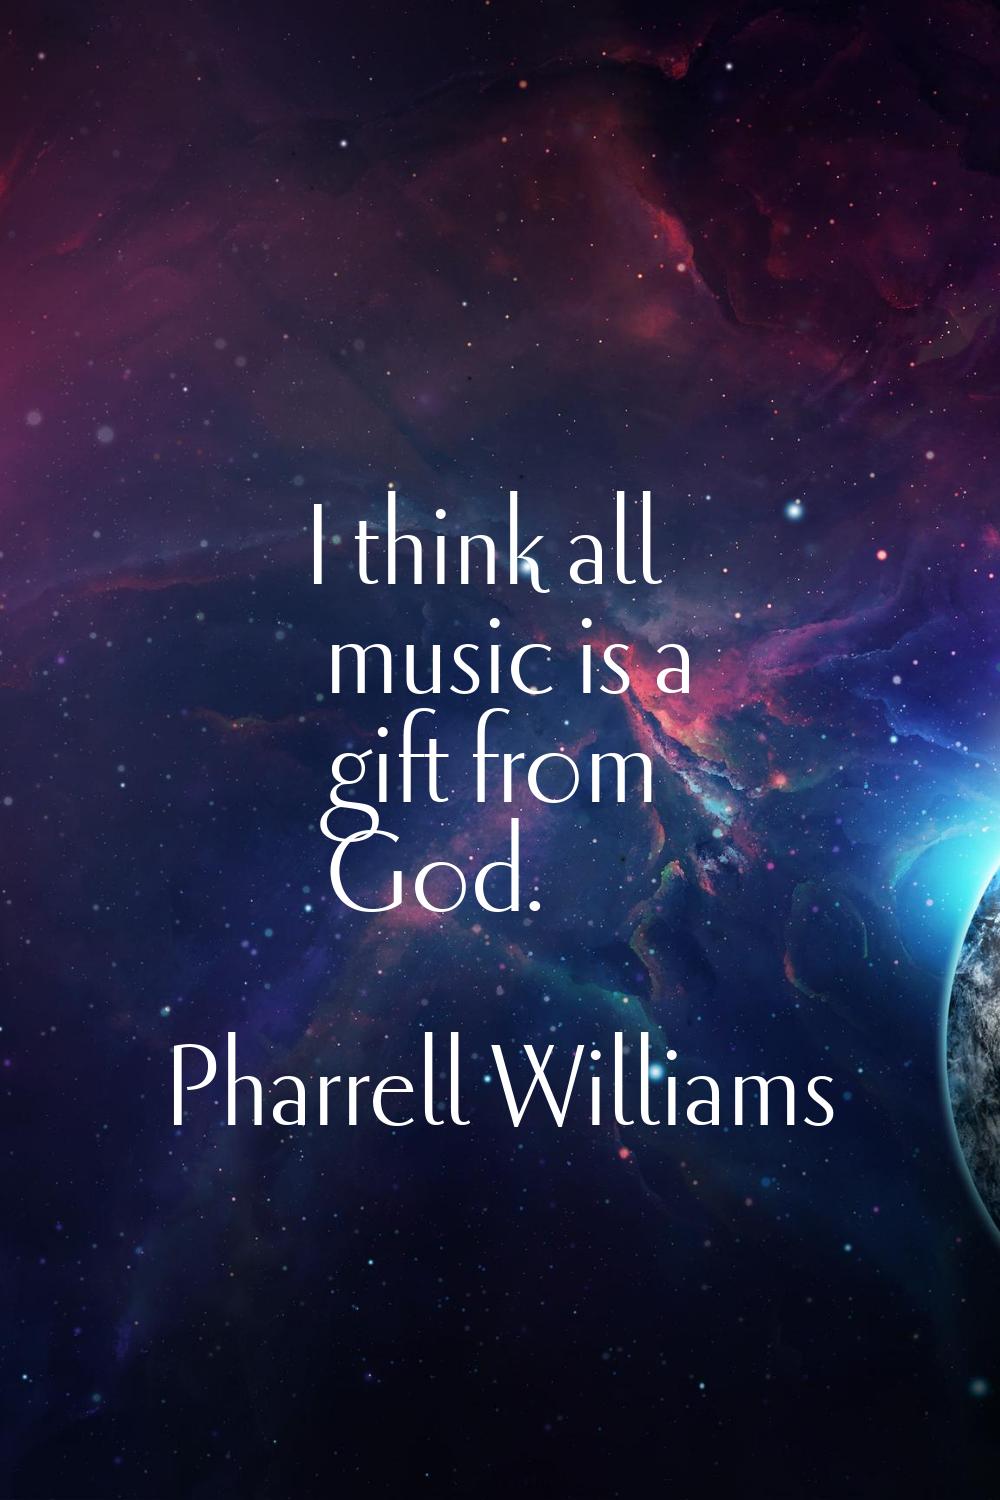 I think all music is a gift from God.